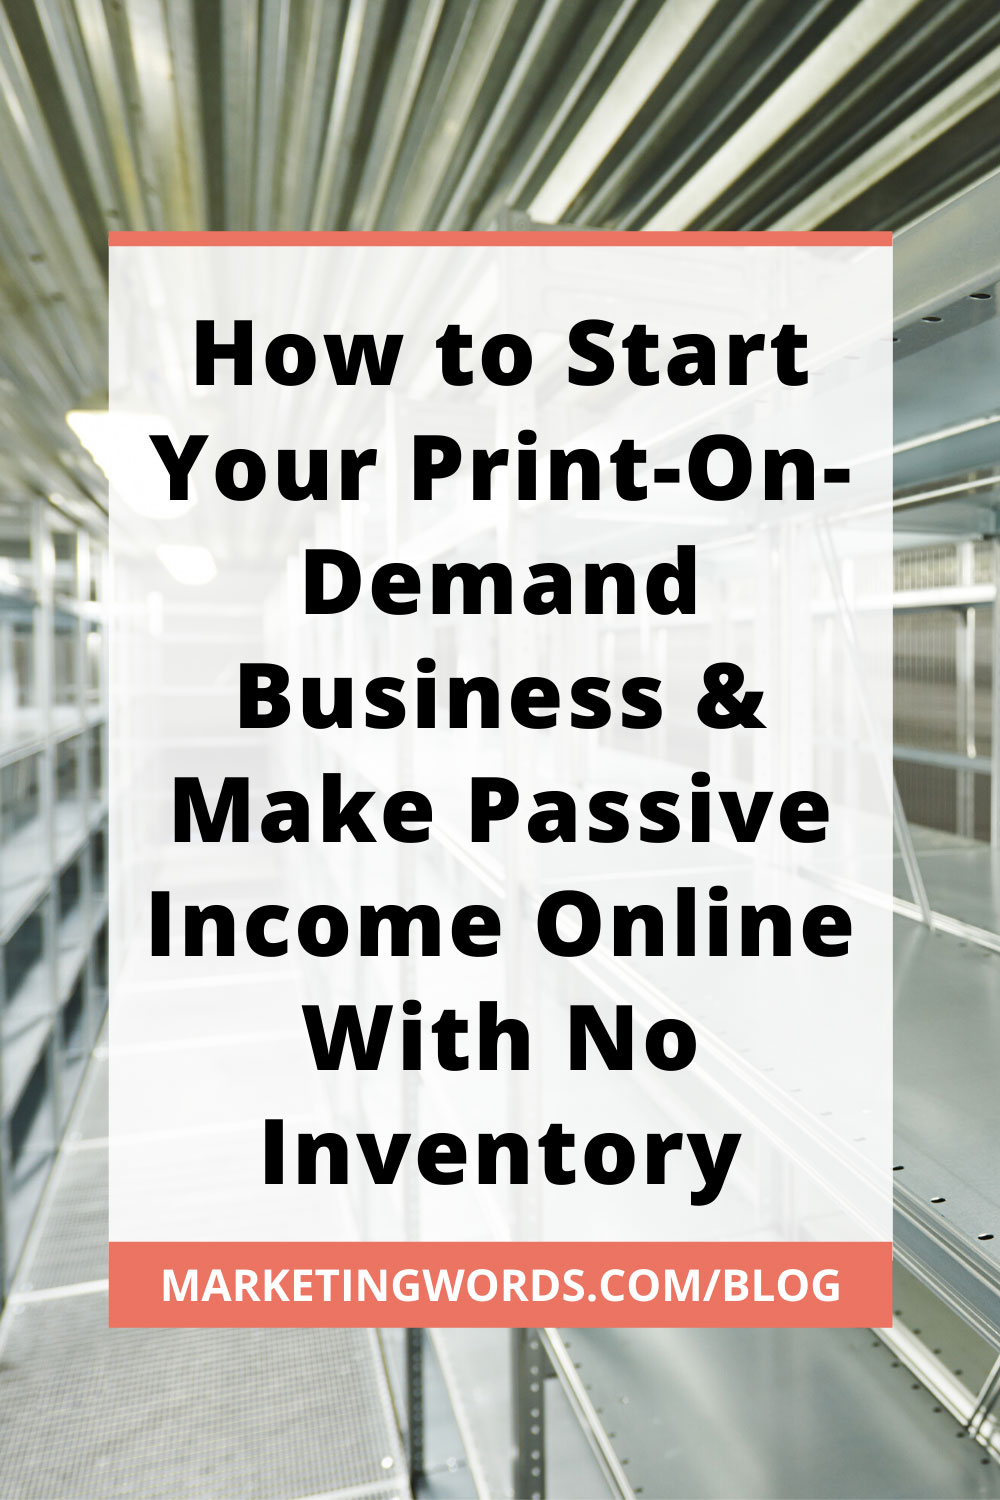 Start Your Print-On-Demand Business & Make Passive Income Online With No Inventory